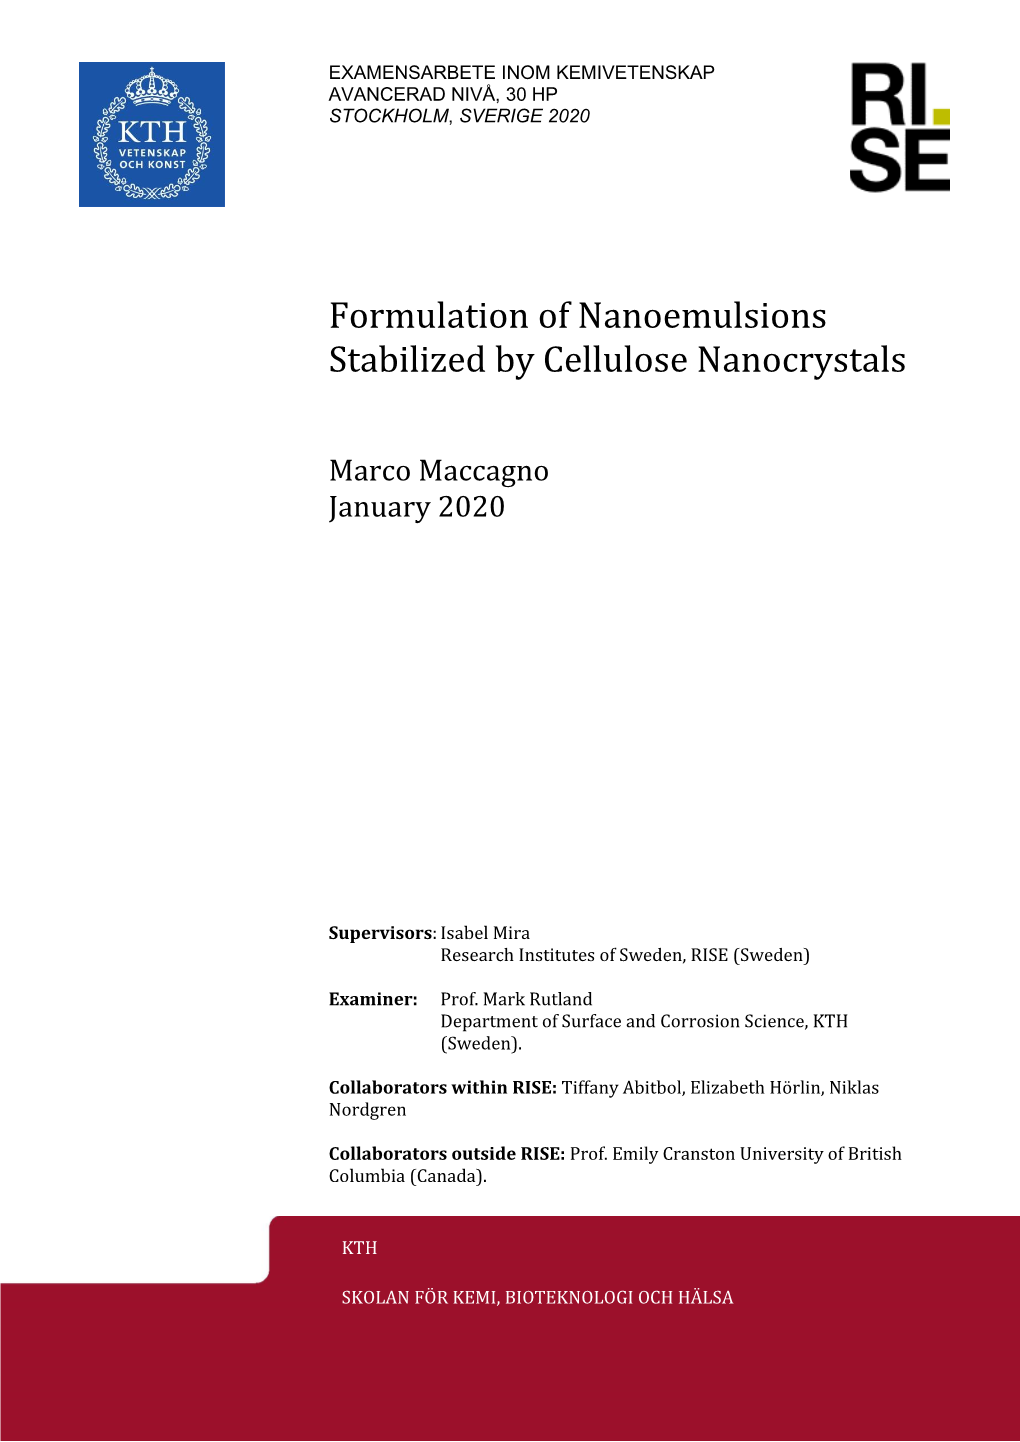 Formulation of Nanoemulsions Stabilized by Cellulose Nanocrystals